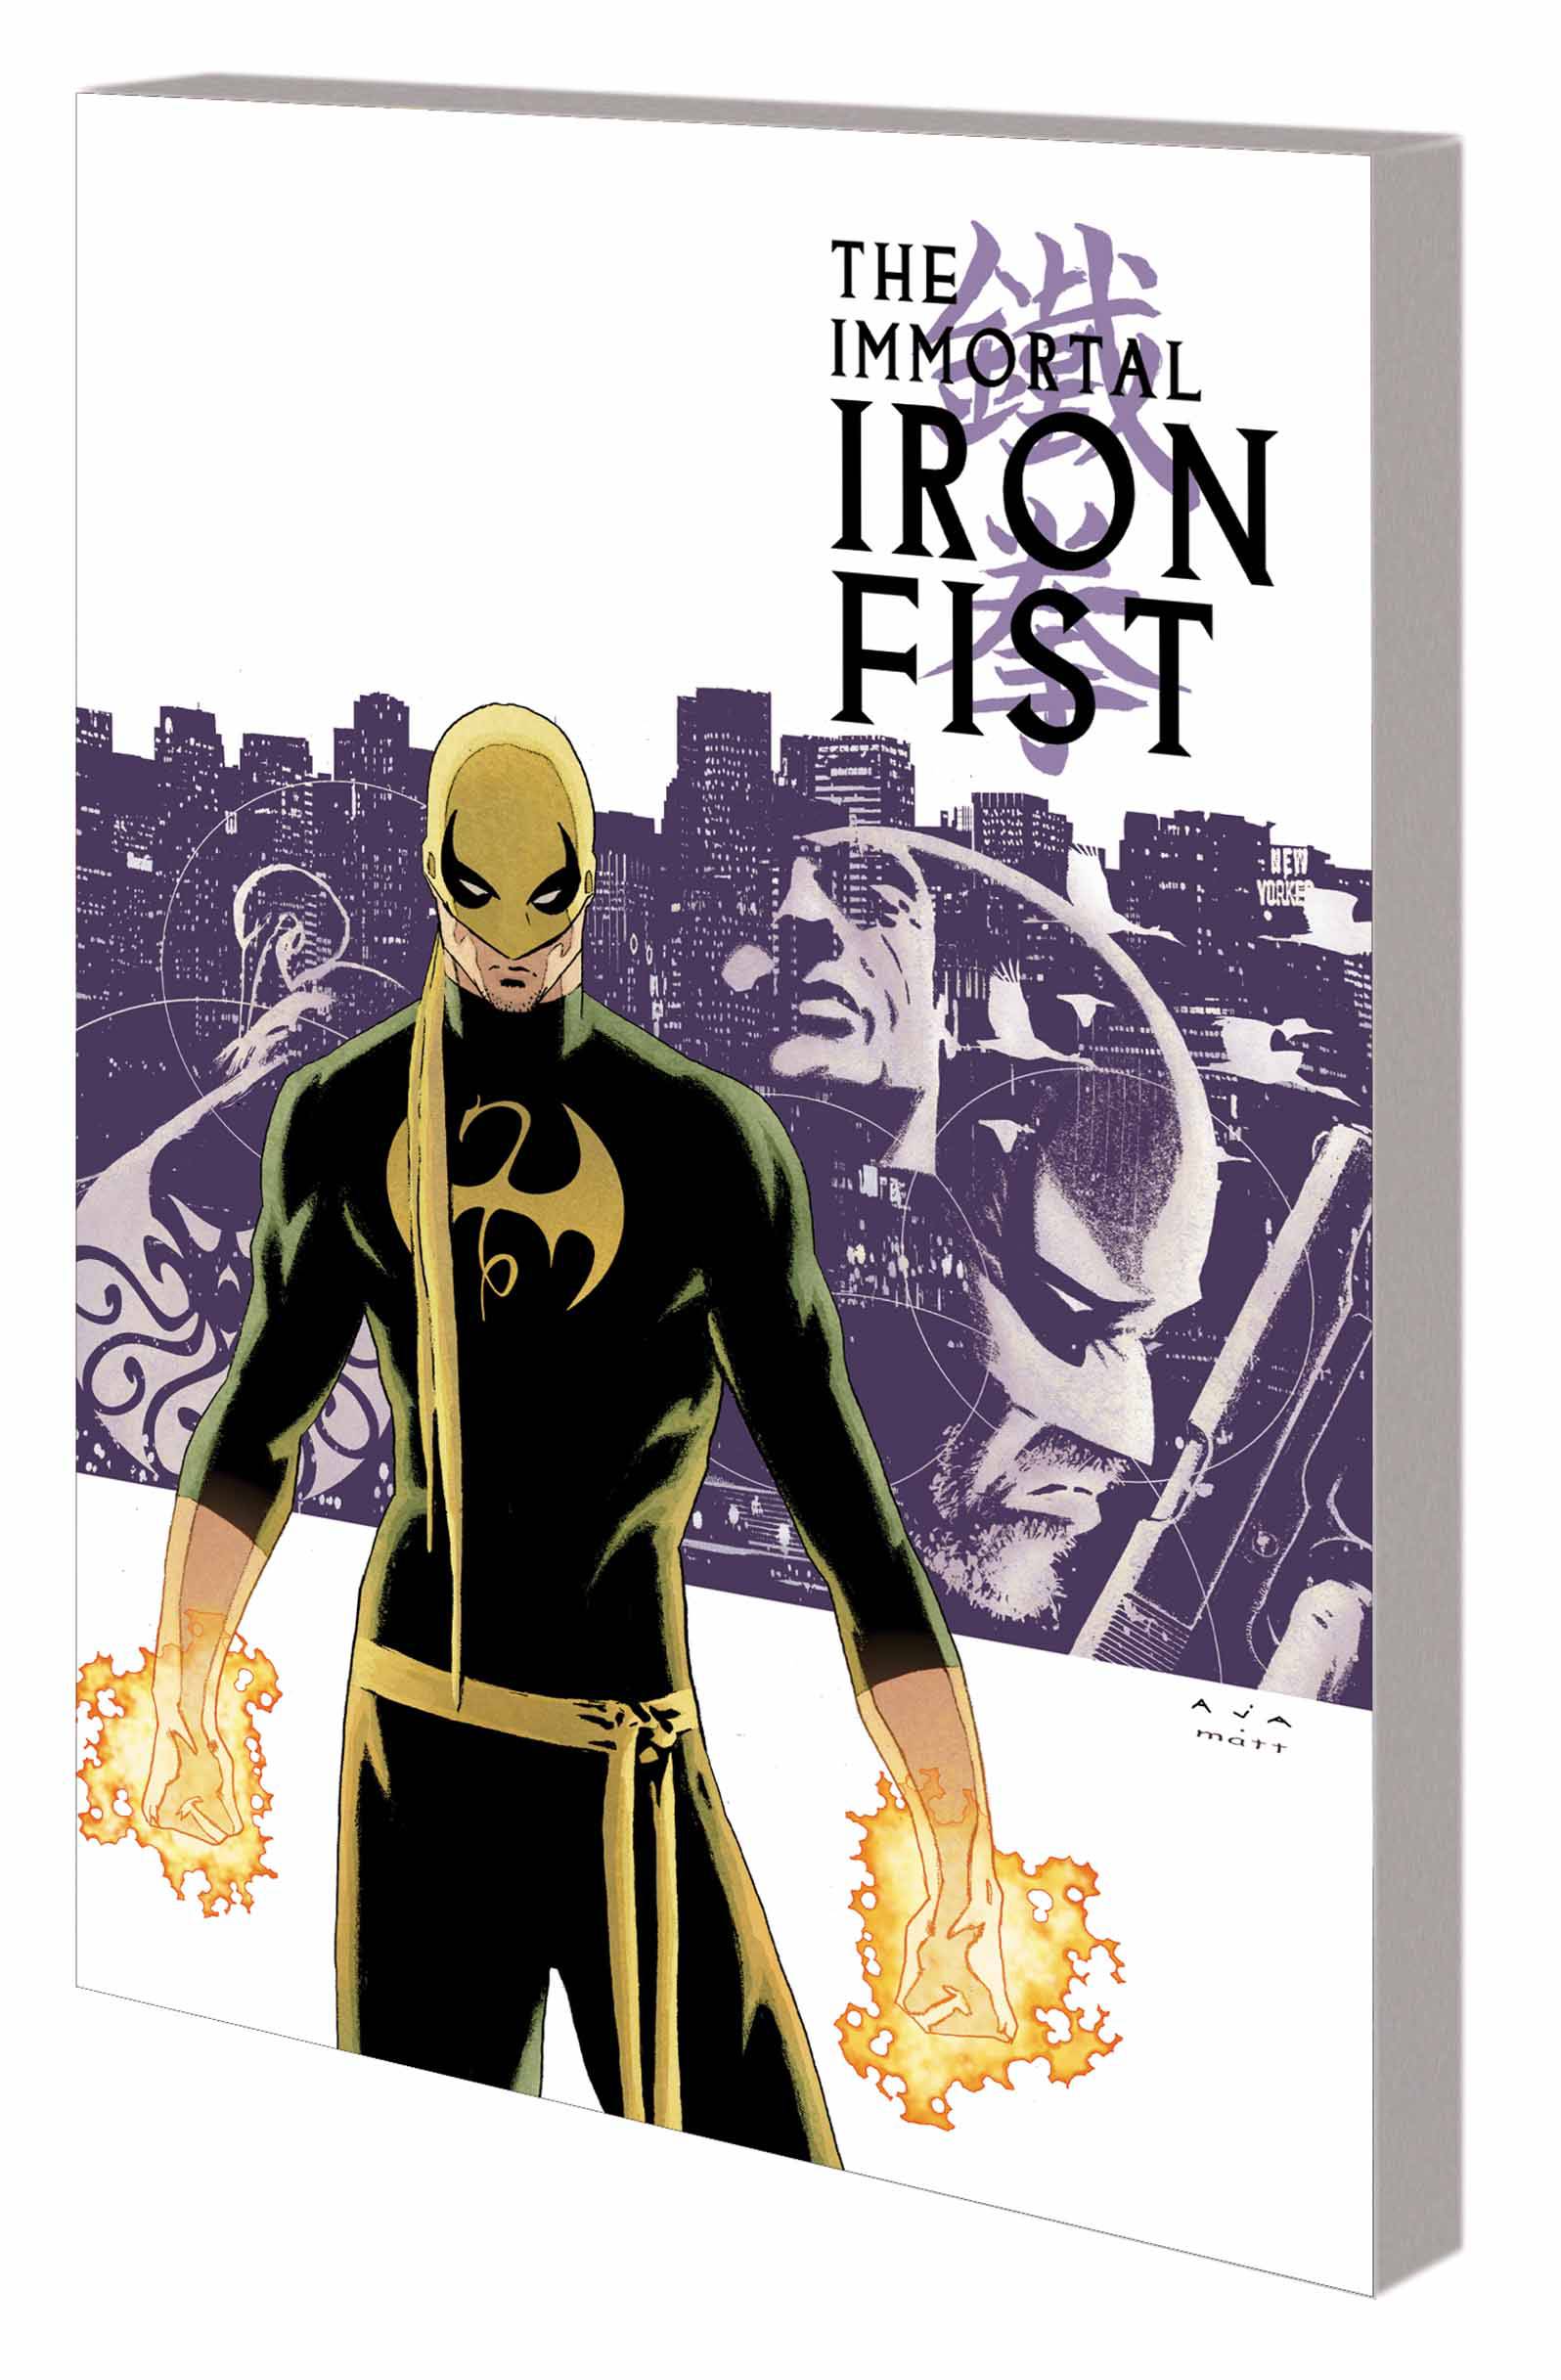 IMMORTAL IRON FIST: THE COMPLETE COLLECTION VOL 01